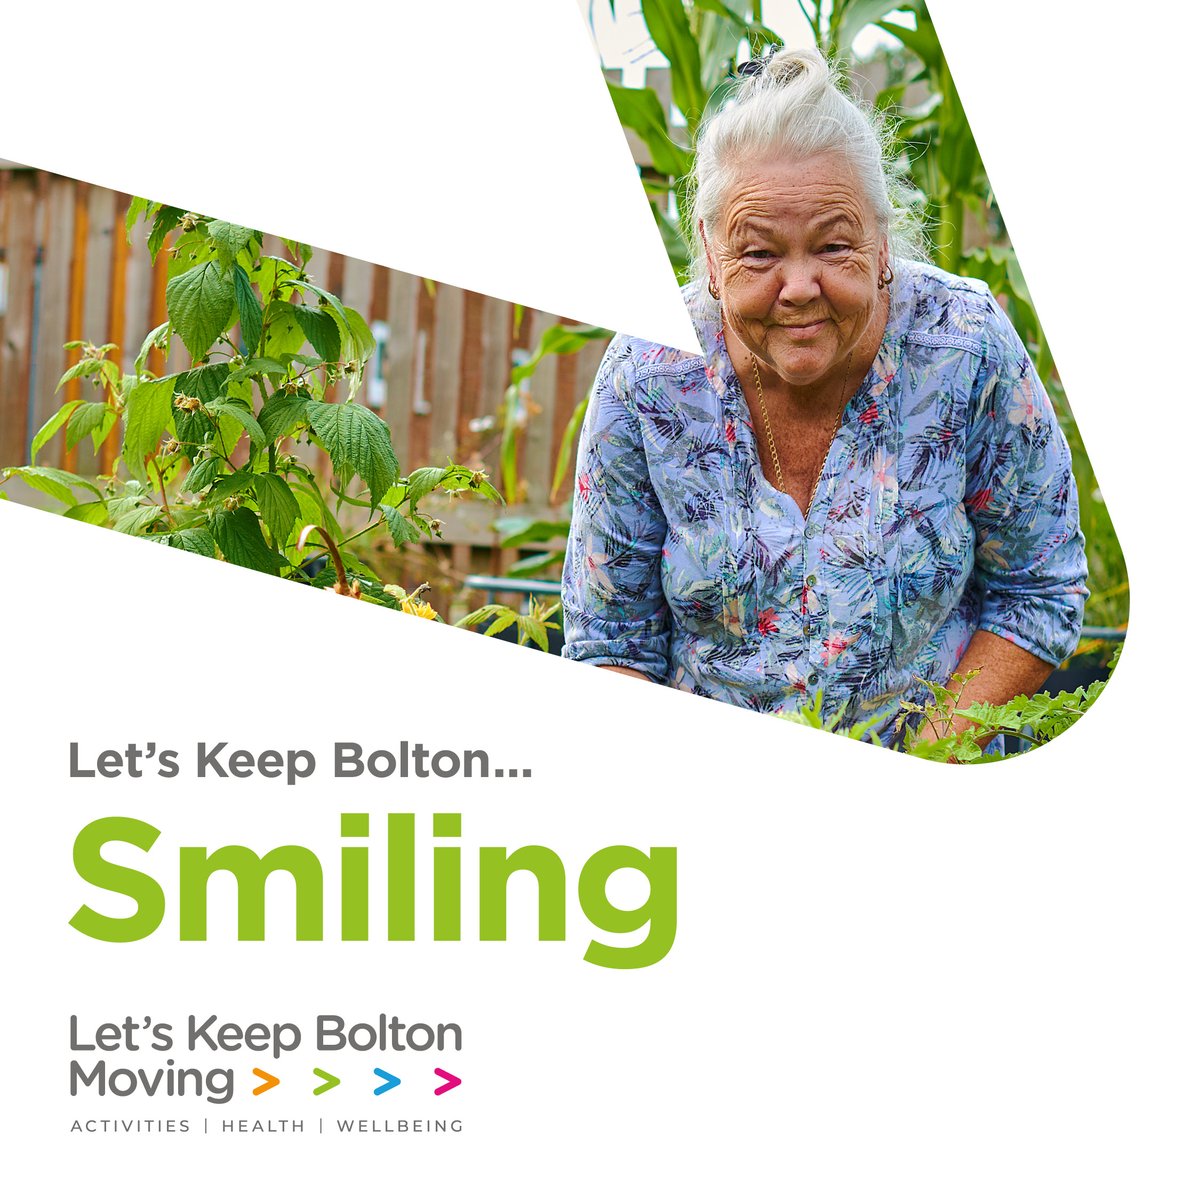 Whatever your age or ability, finding time to move each day is great for your health. Heel raises while you’re making a brew ☕ or grooving while you’re hoovering 💃 Find those 30 minutes a day where you can #keepmoving. Let's keep moving Bolton!